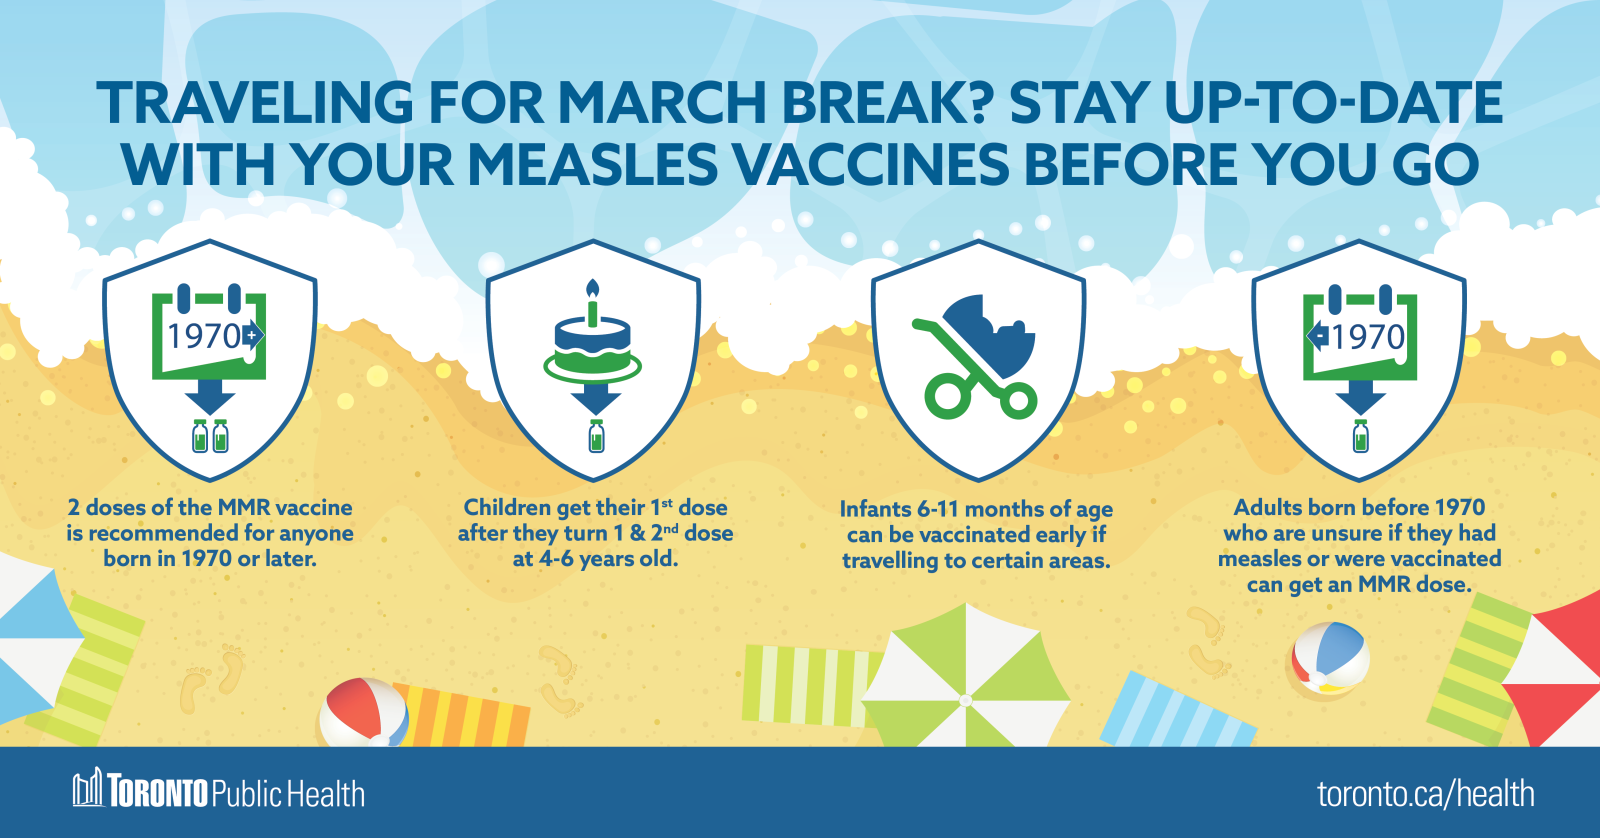 Graphic reads “travelling abroad? Stay up-to-date with your measles vaccines before you go,” with dose recommendations based on age. 